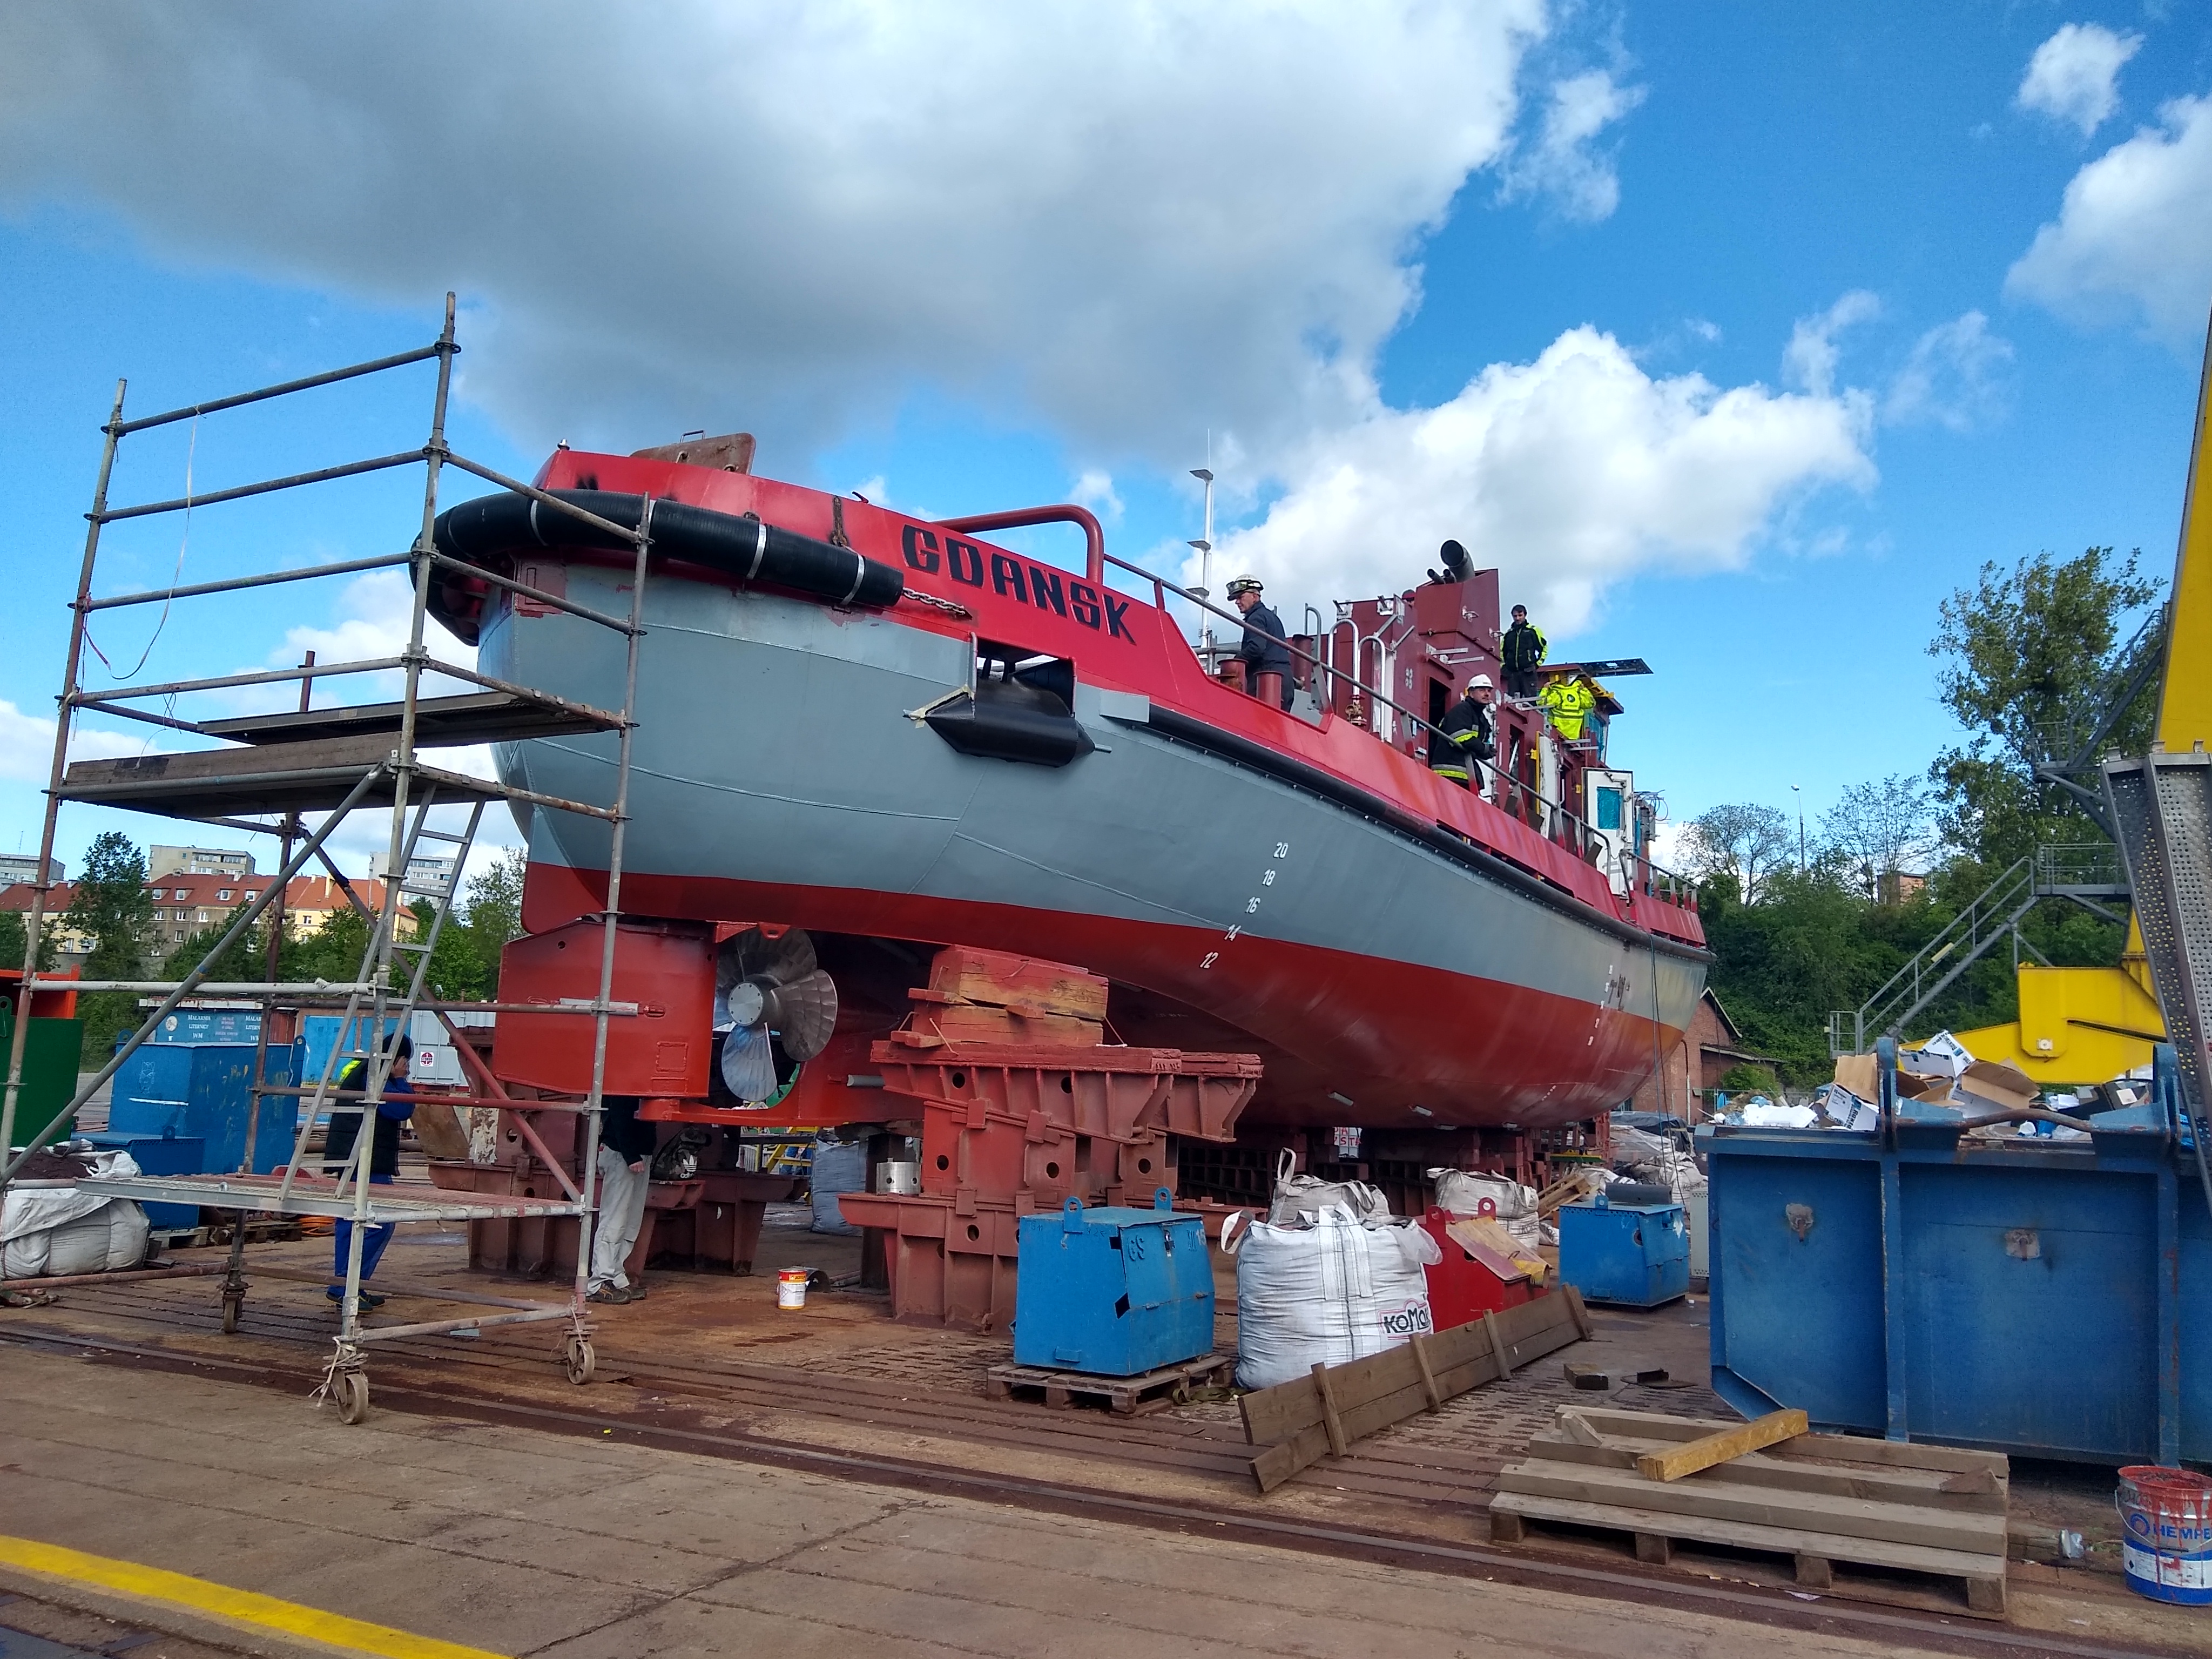 Launching of linear icebreaker for Regional Water Authorities in Gdańsk - MarinePoland.com